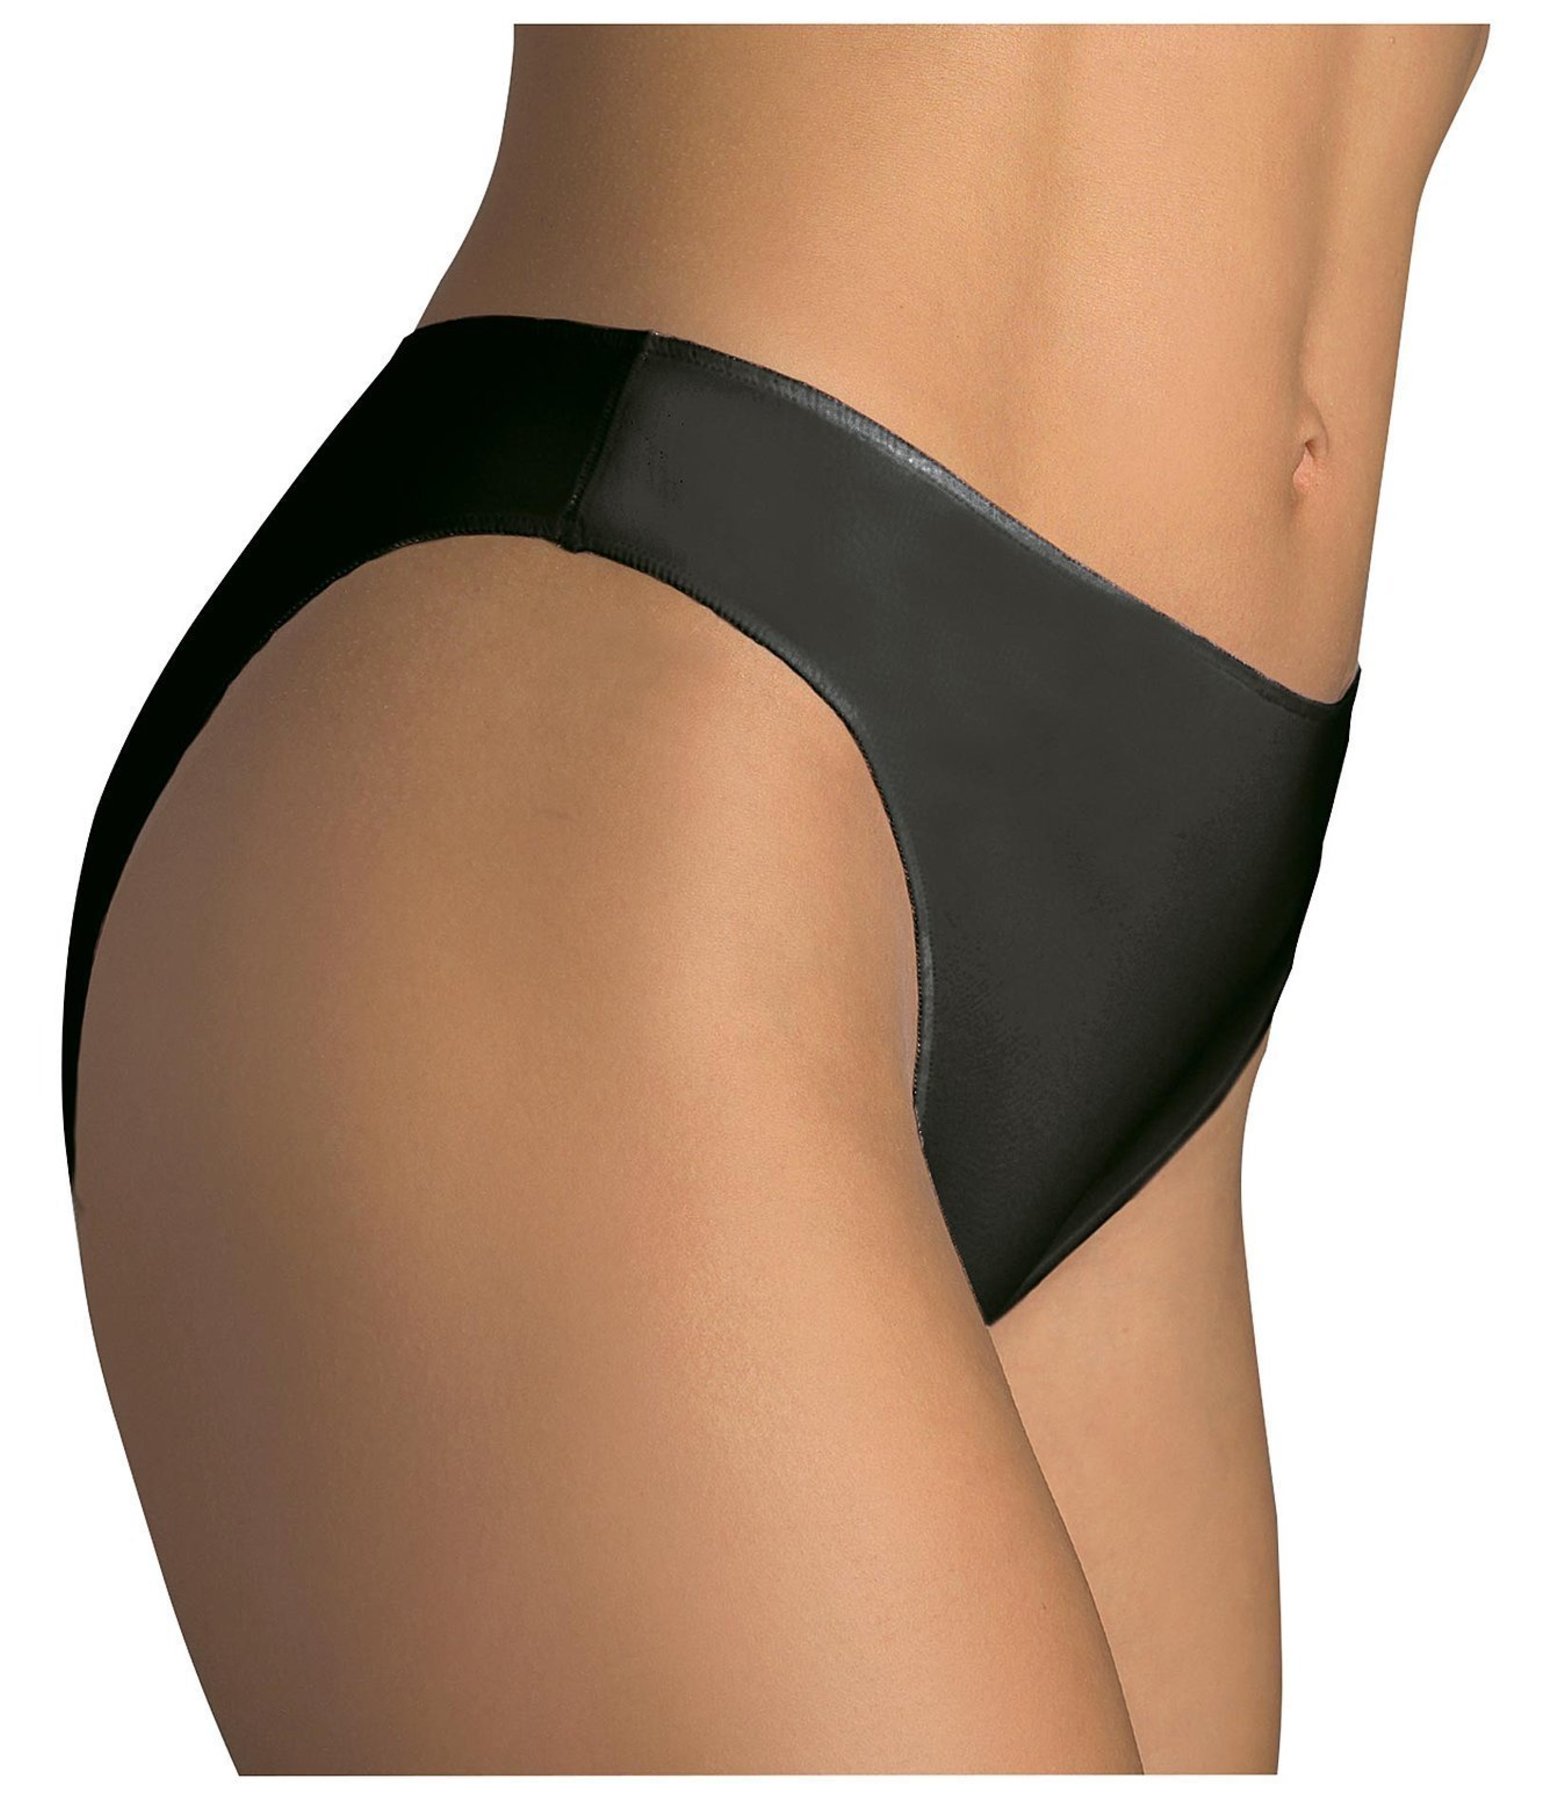 Microfibre Knickers, Set of 2